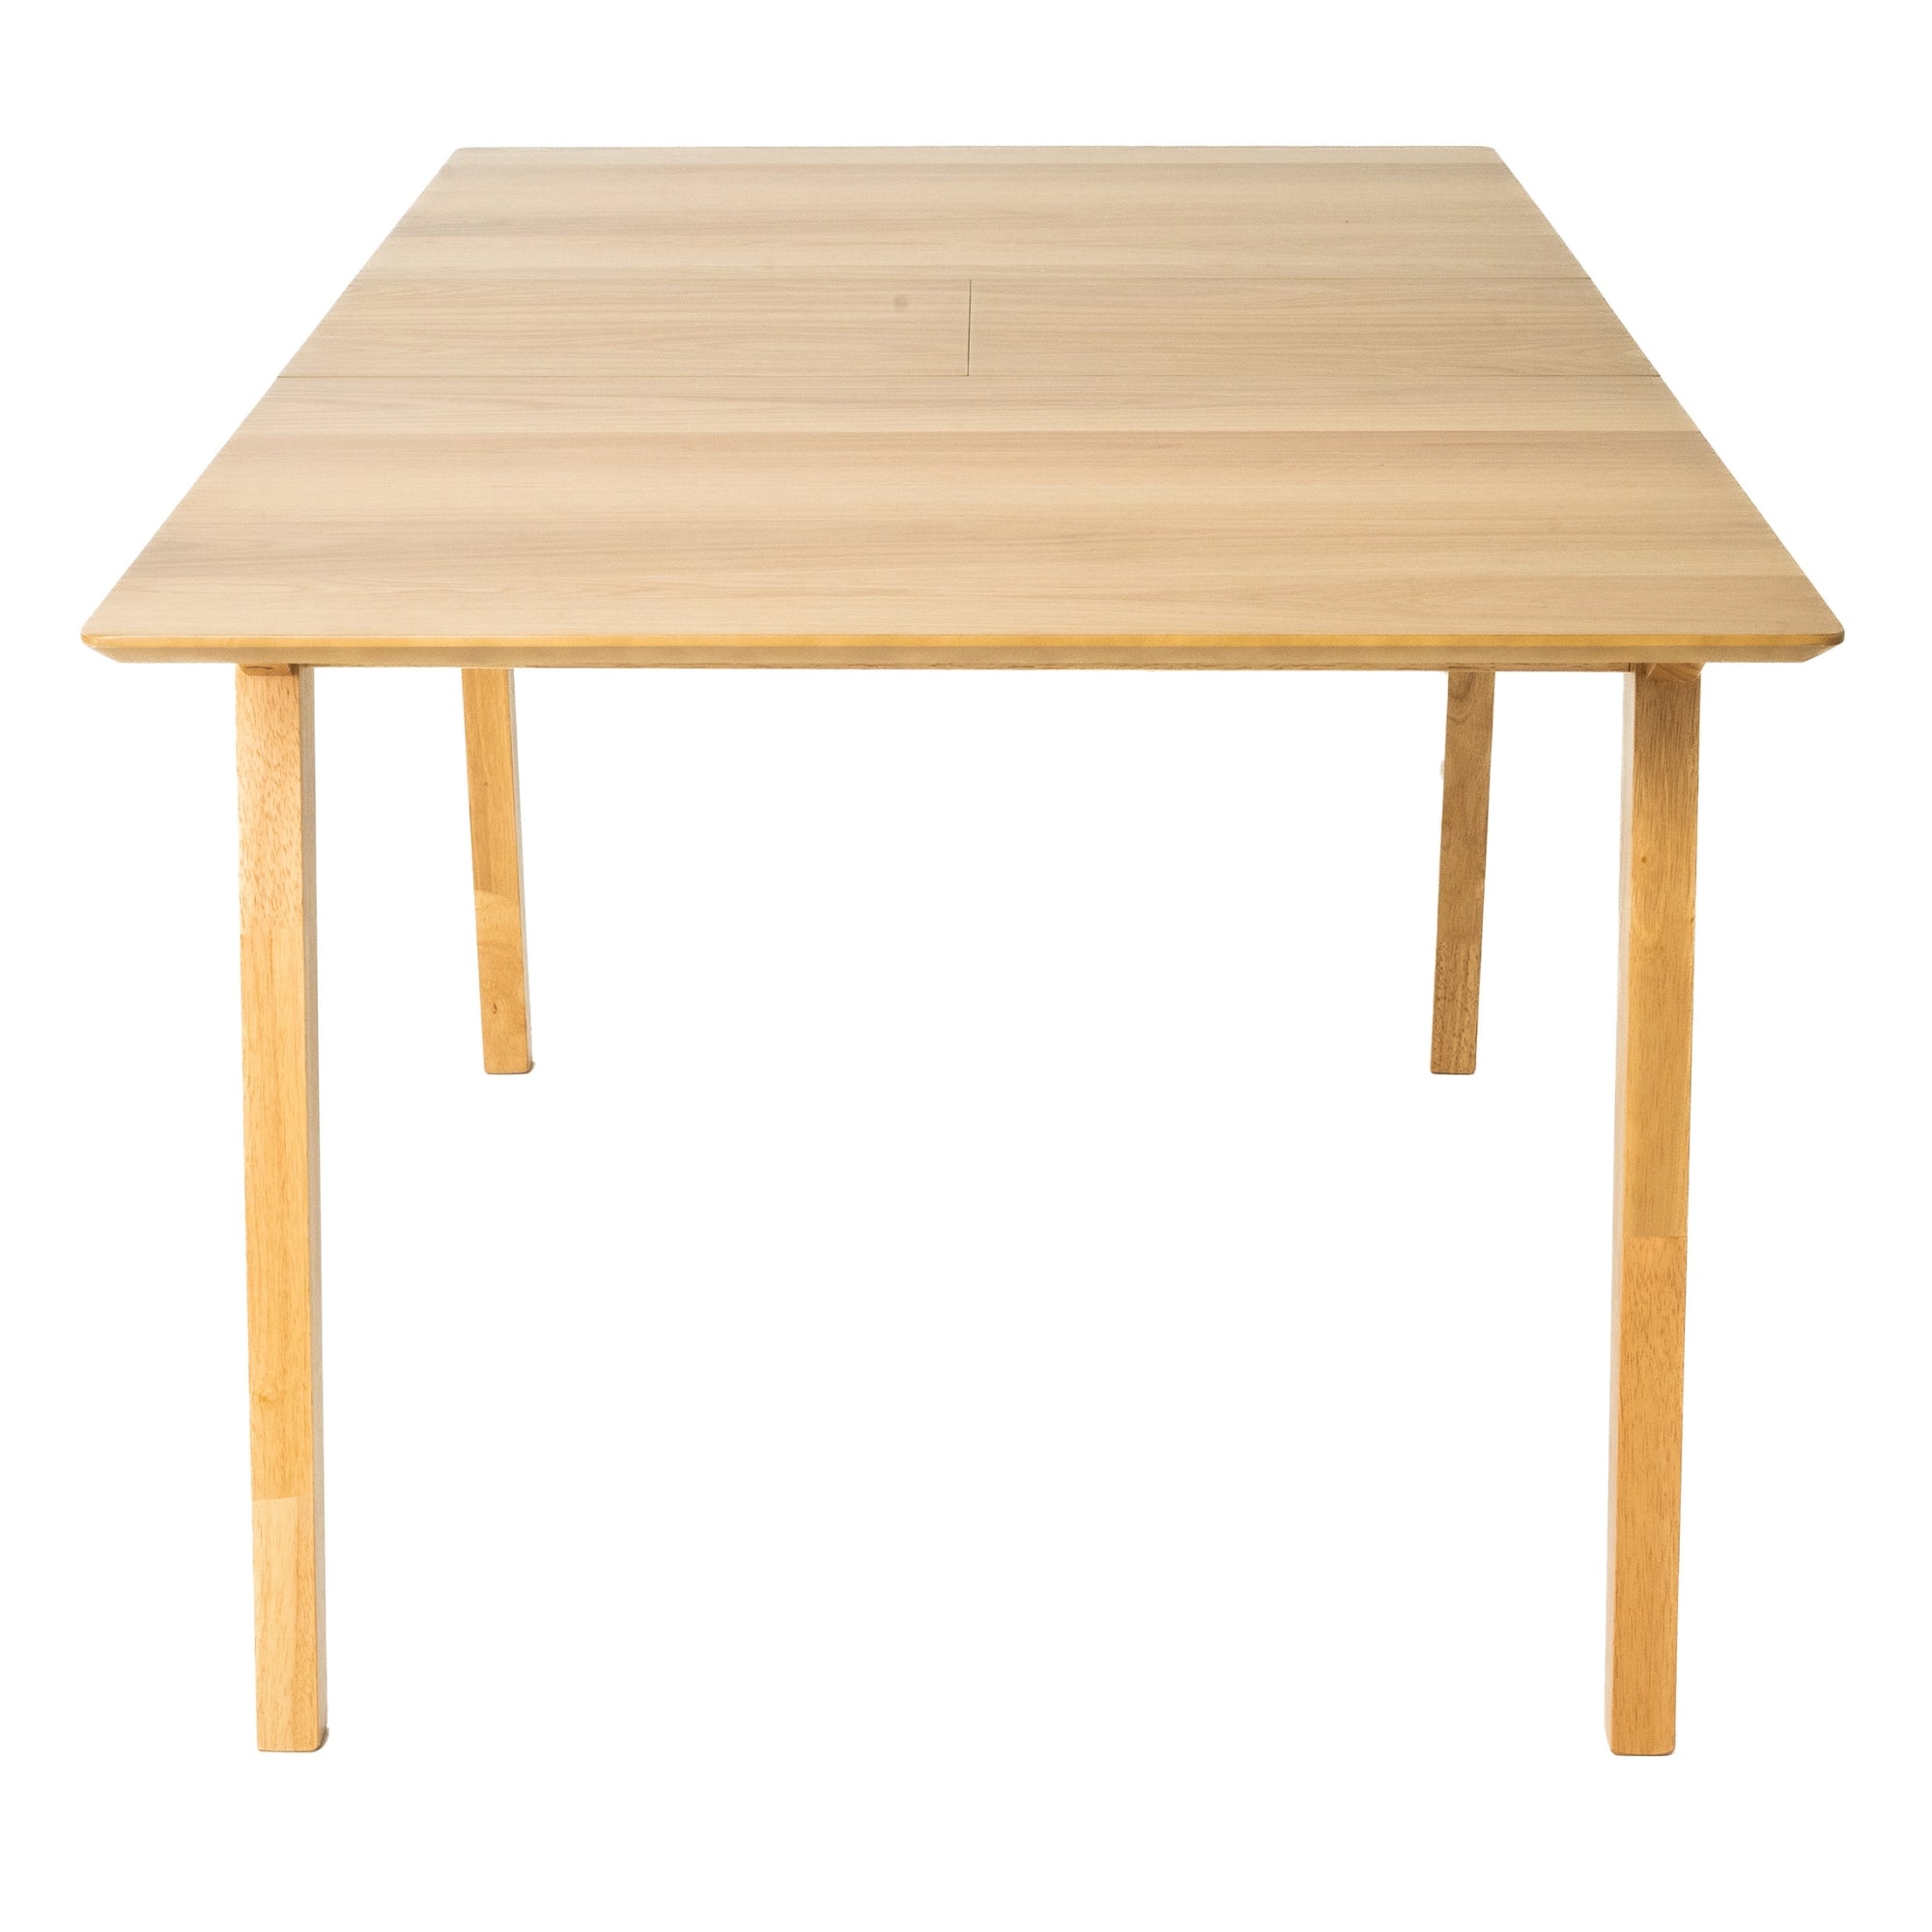 Extendable Scandinavian Dining Table, Solid Rubberwood, 8-Seater